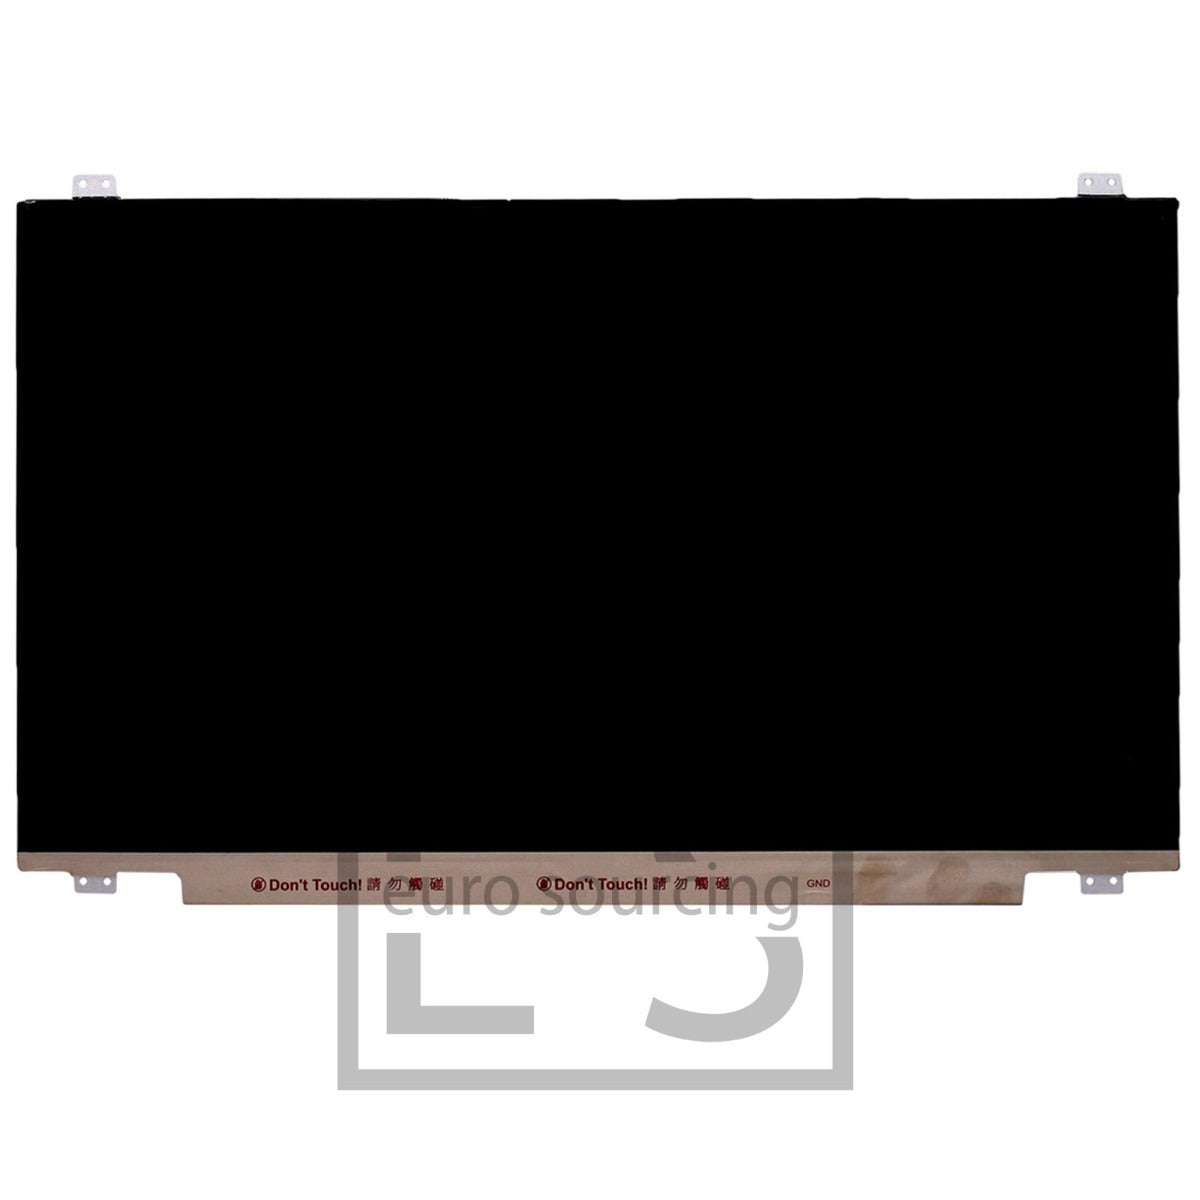 Replacement For B173RTN02.1 17.3" LED SLIM 30 PIN EDP WXGA++ Matte Screen Display Panel Compatible With DELL PRECISION 17 7740